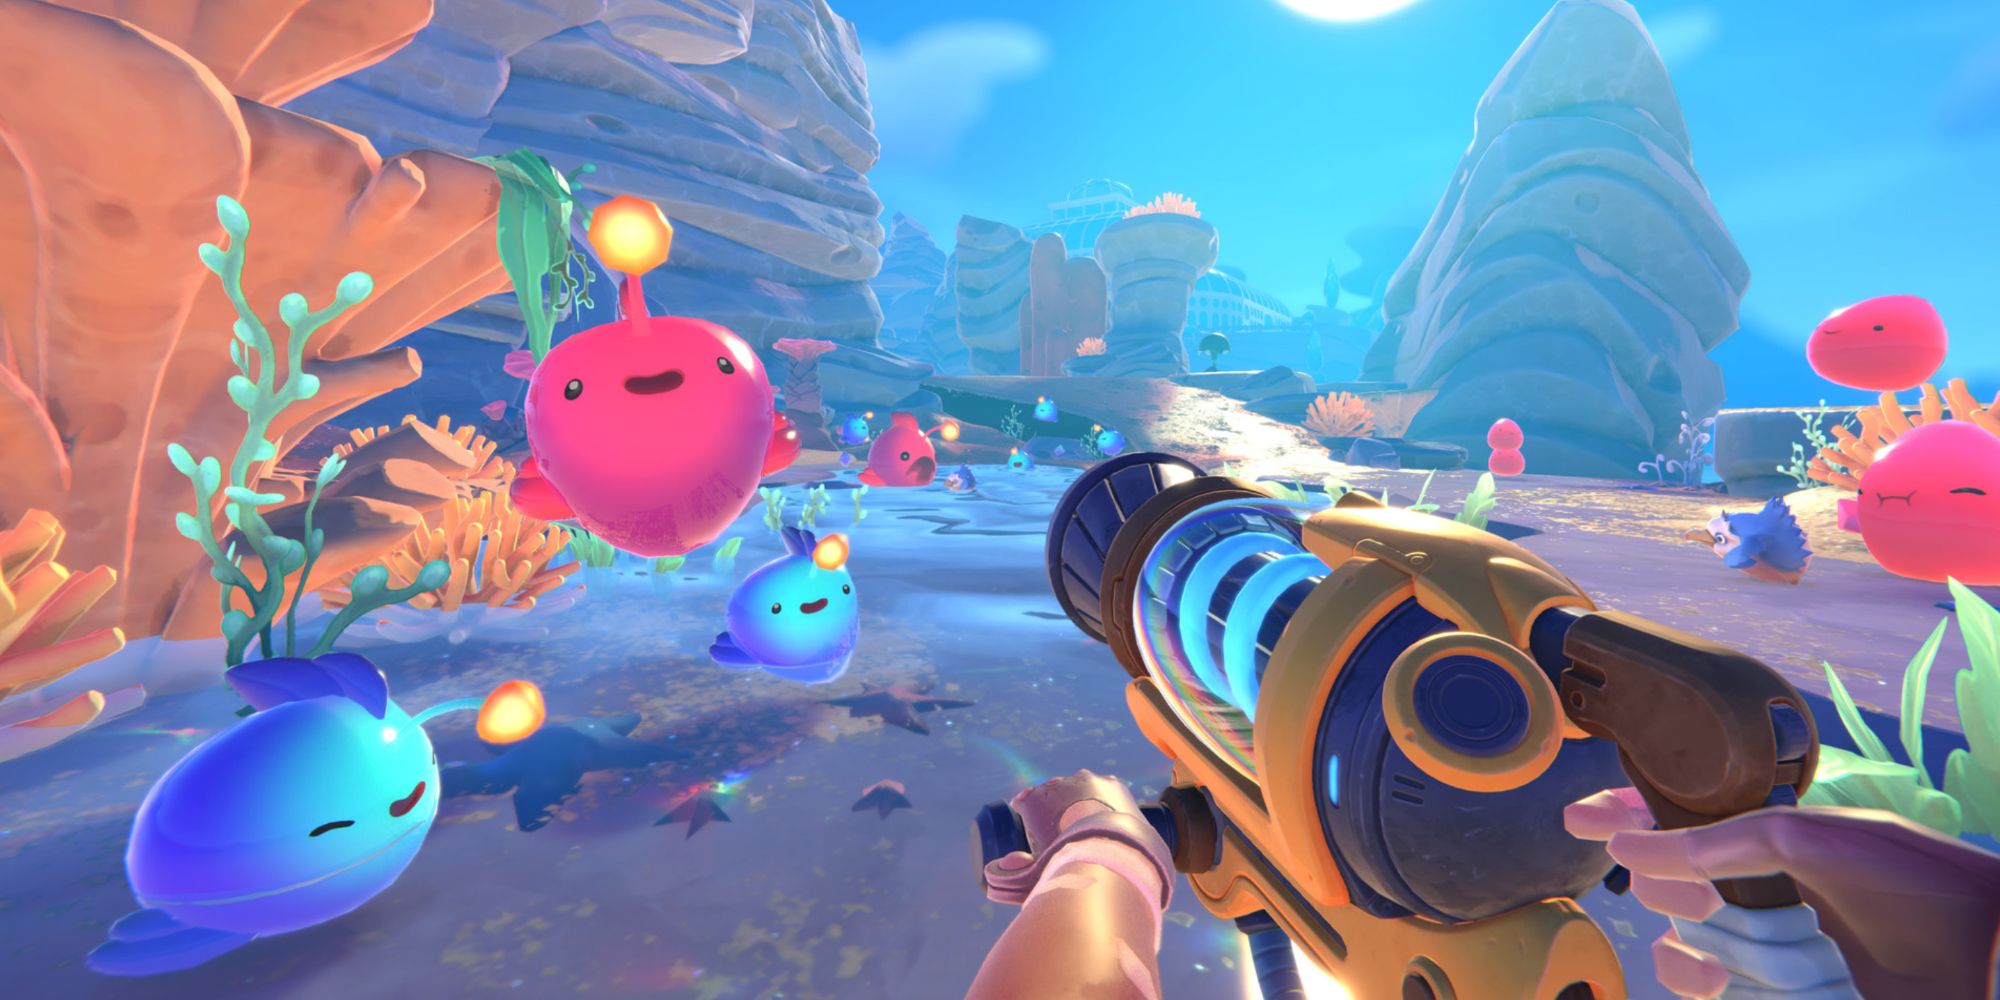 Beatrix LeBeau wielding a Vacpack in front of various slimes in Slime Rancher 2